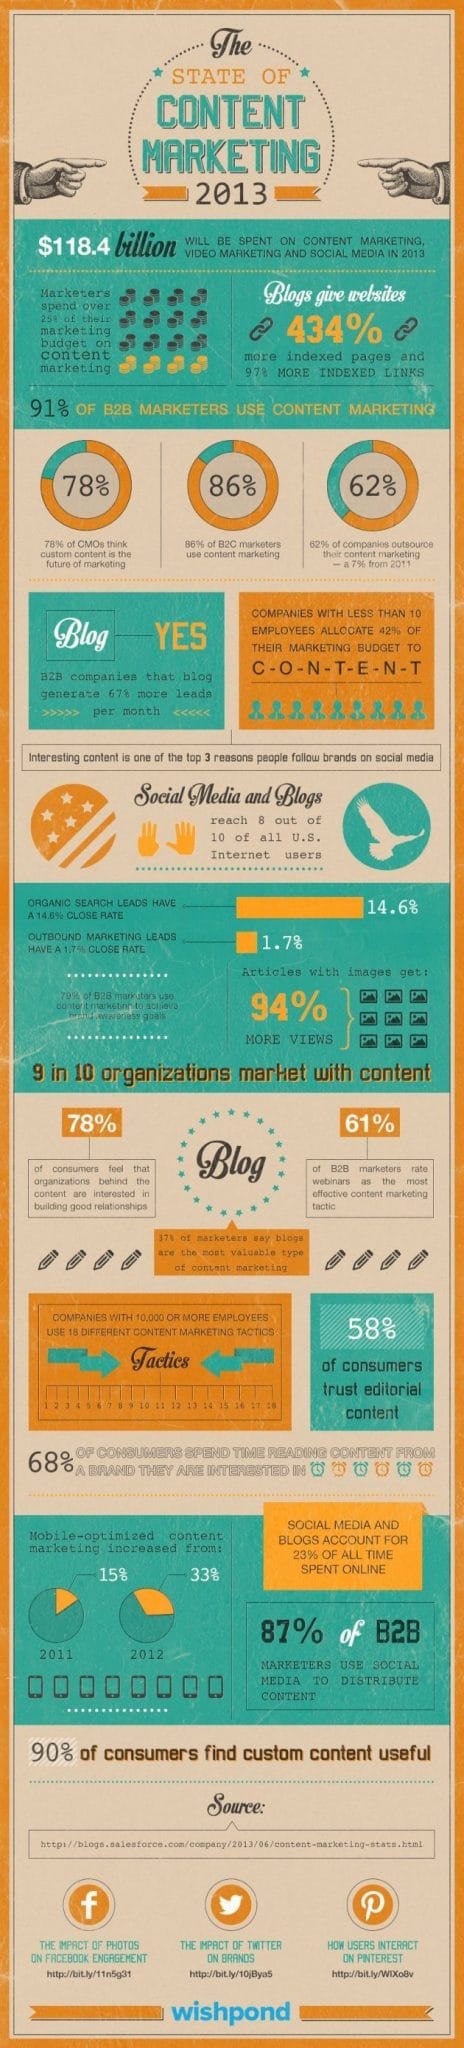 The State Of Content Marketing 2013